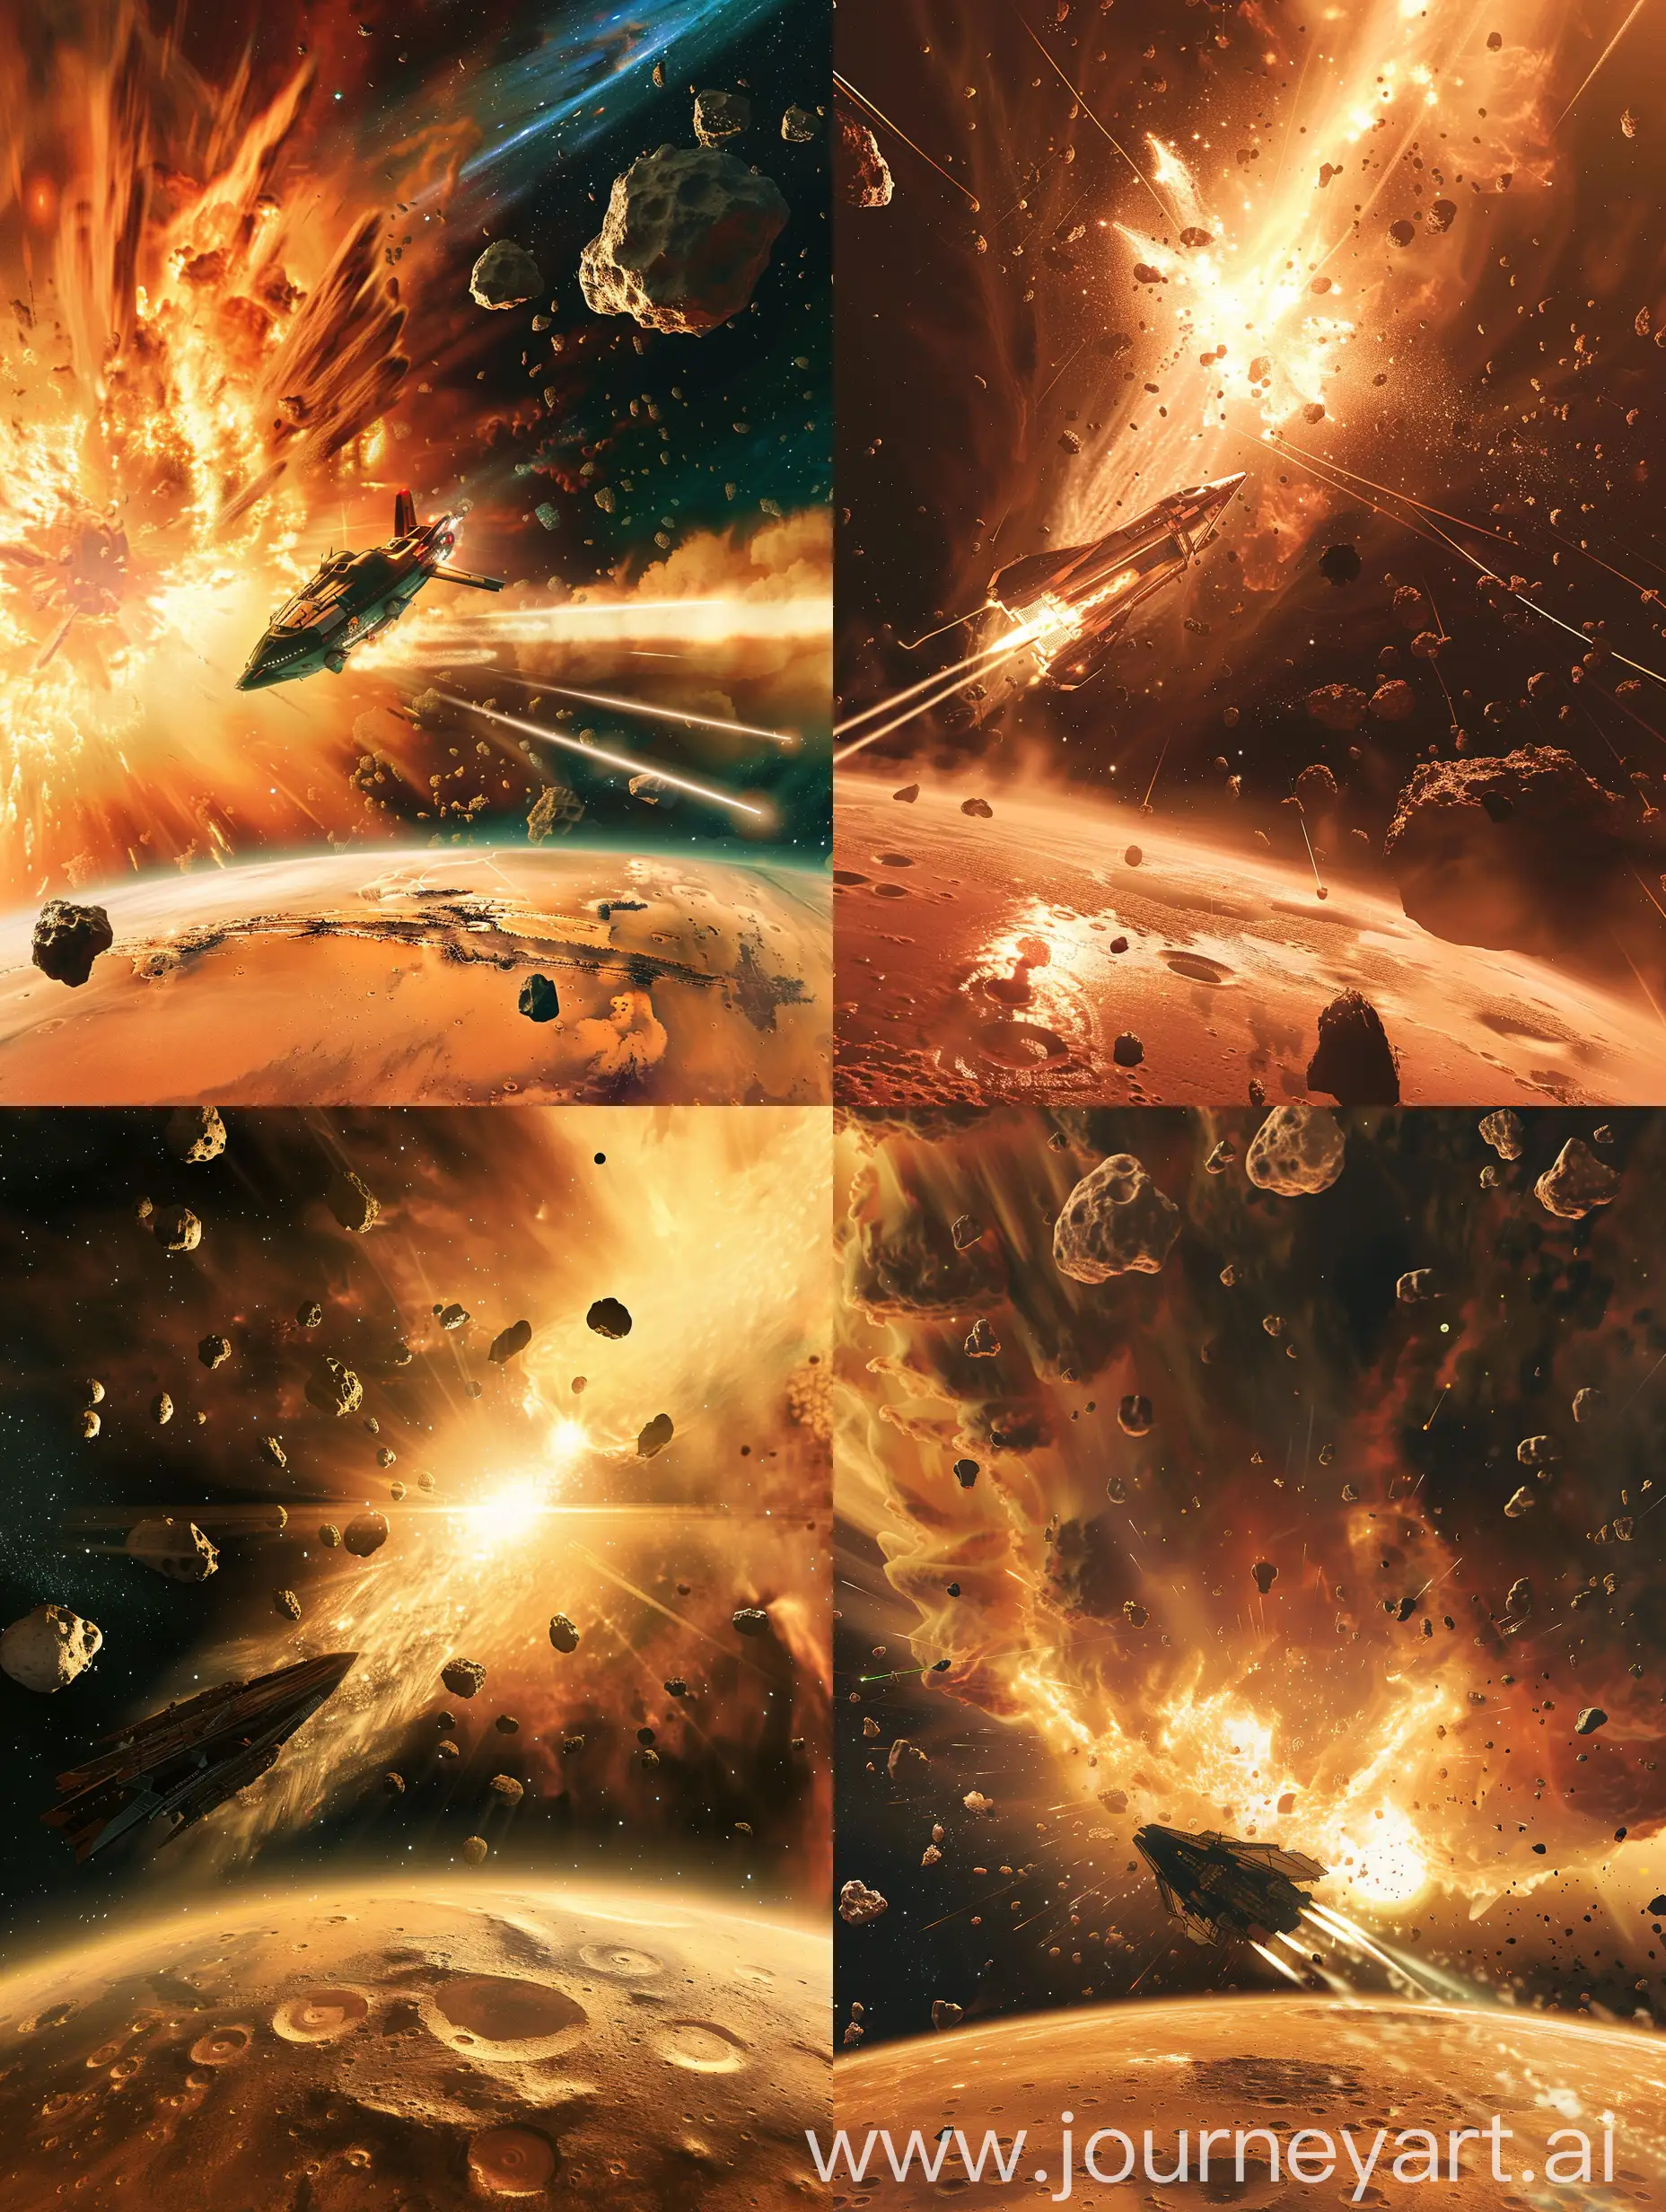 Intense-Spaceship-Race-Escaping-a-Giant-Star-Explosion-with-Mars-Surface-Below